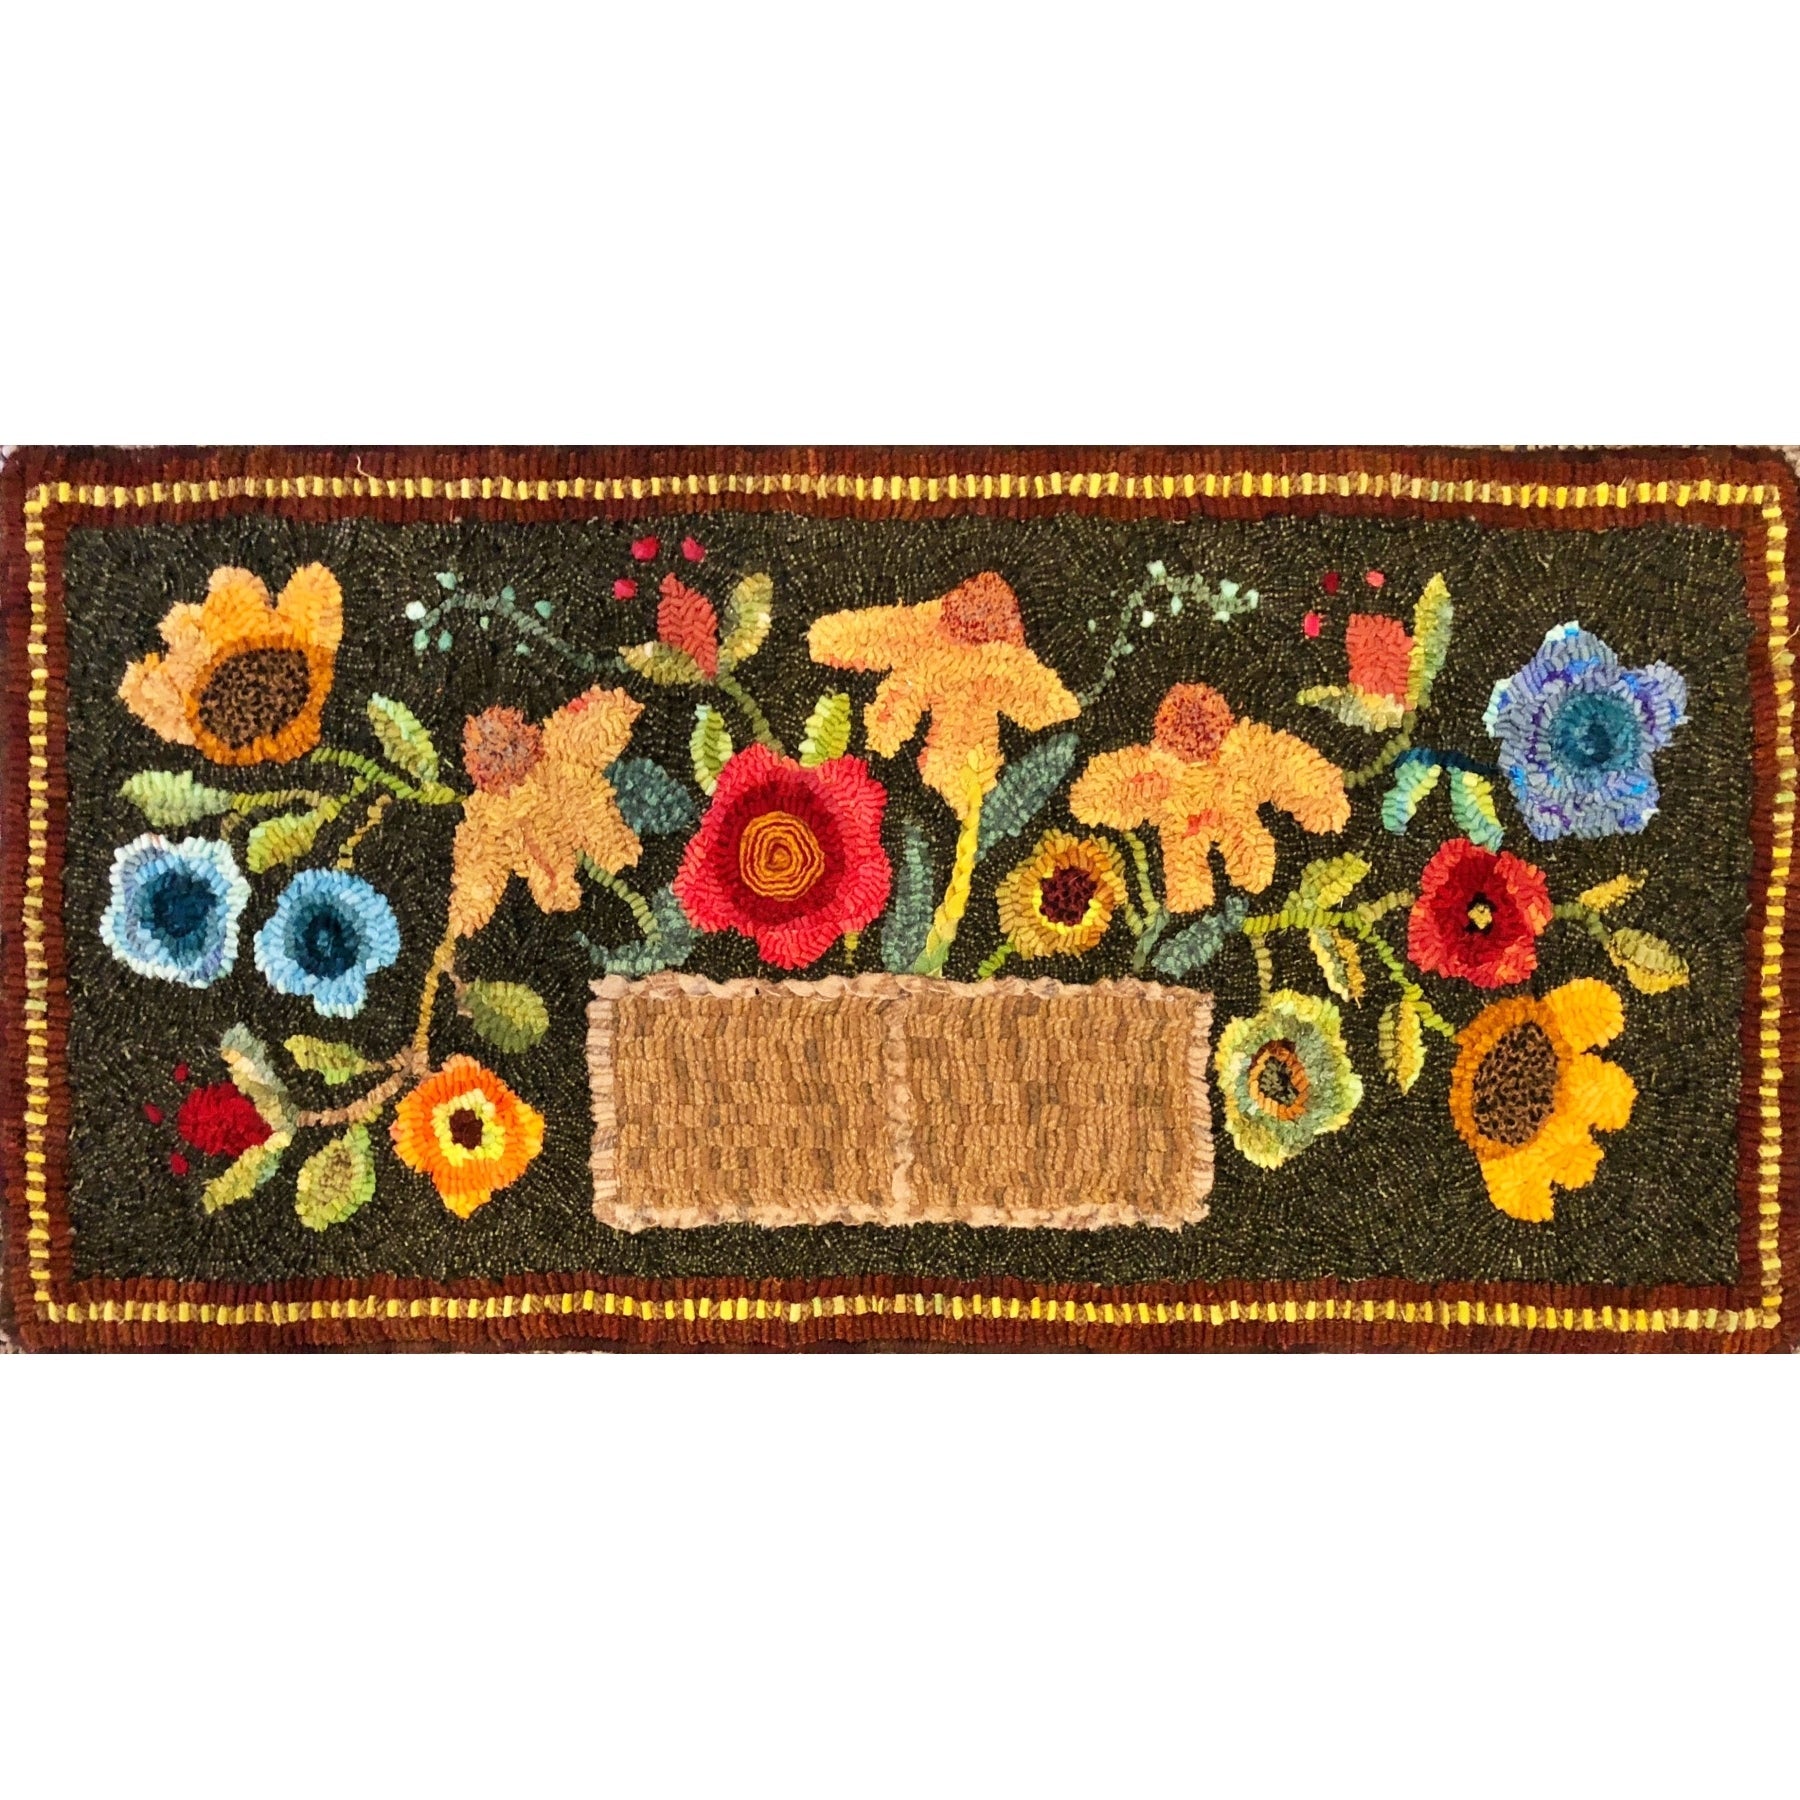 Spring Basket, rug hooked by Betty Allen